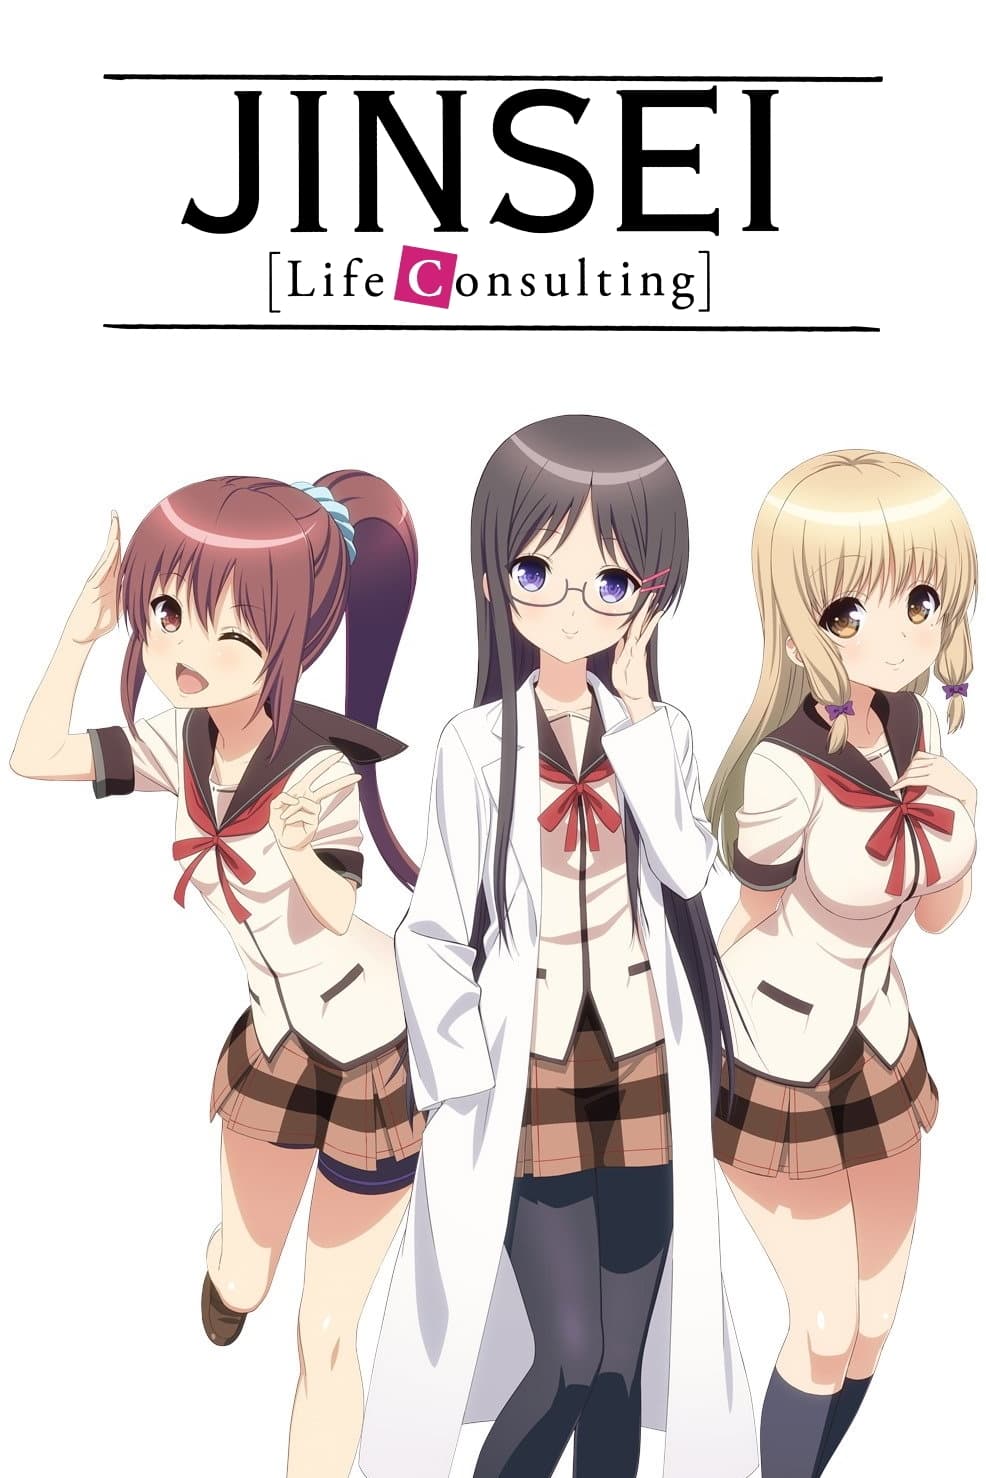 JINSEI - Life Consulting (2014)